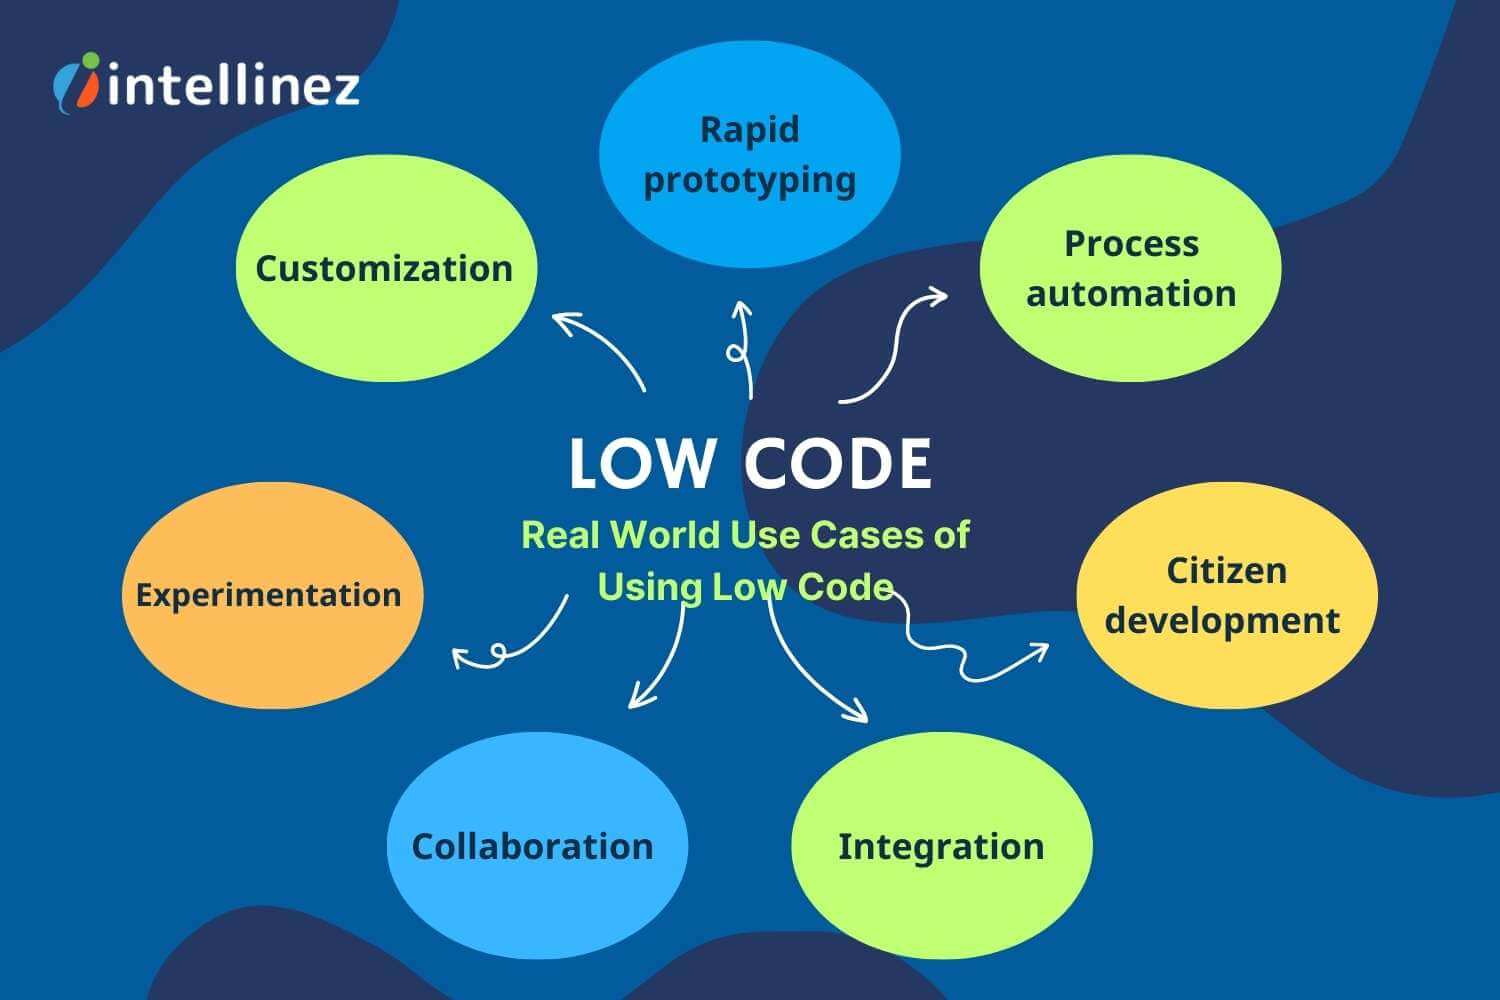 Real World Use Cases of Using Low Code